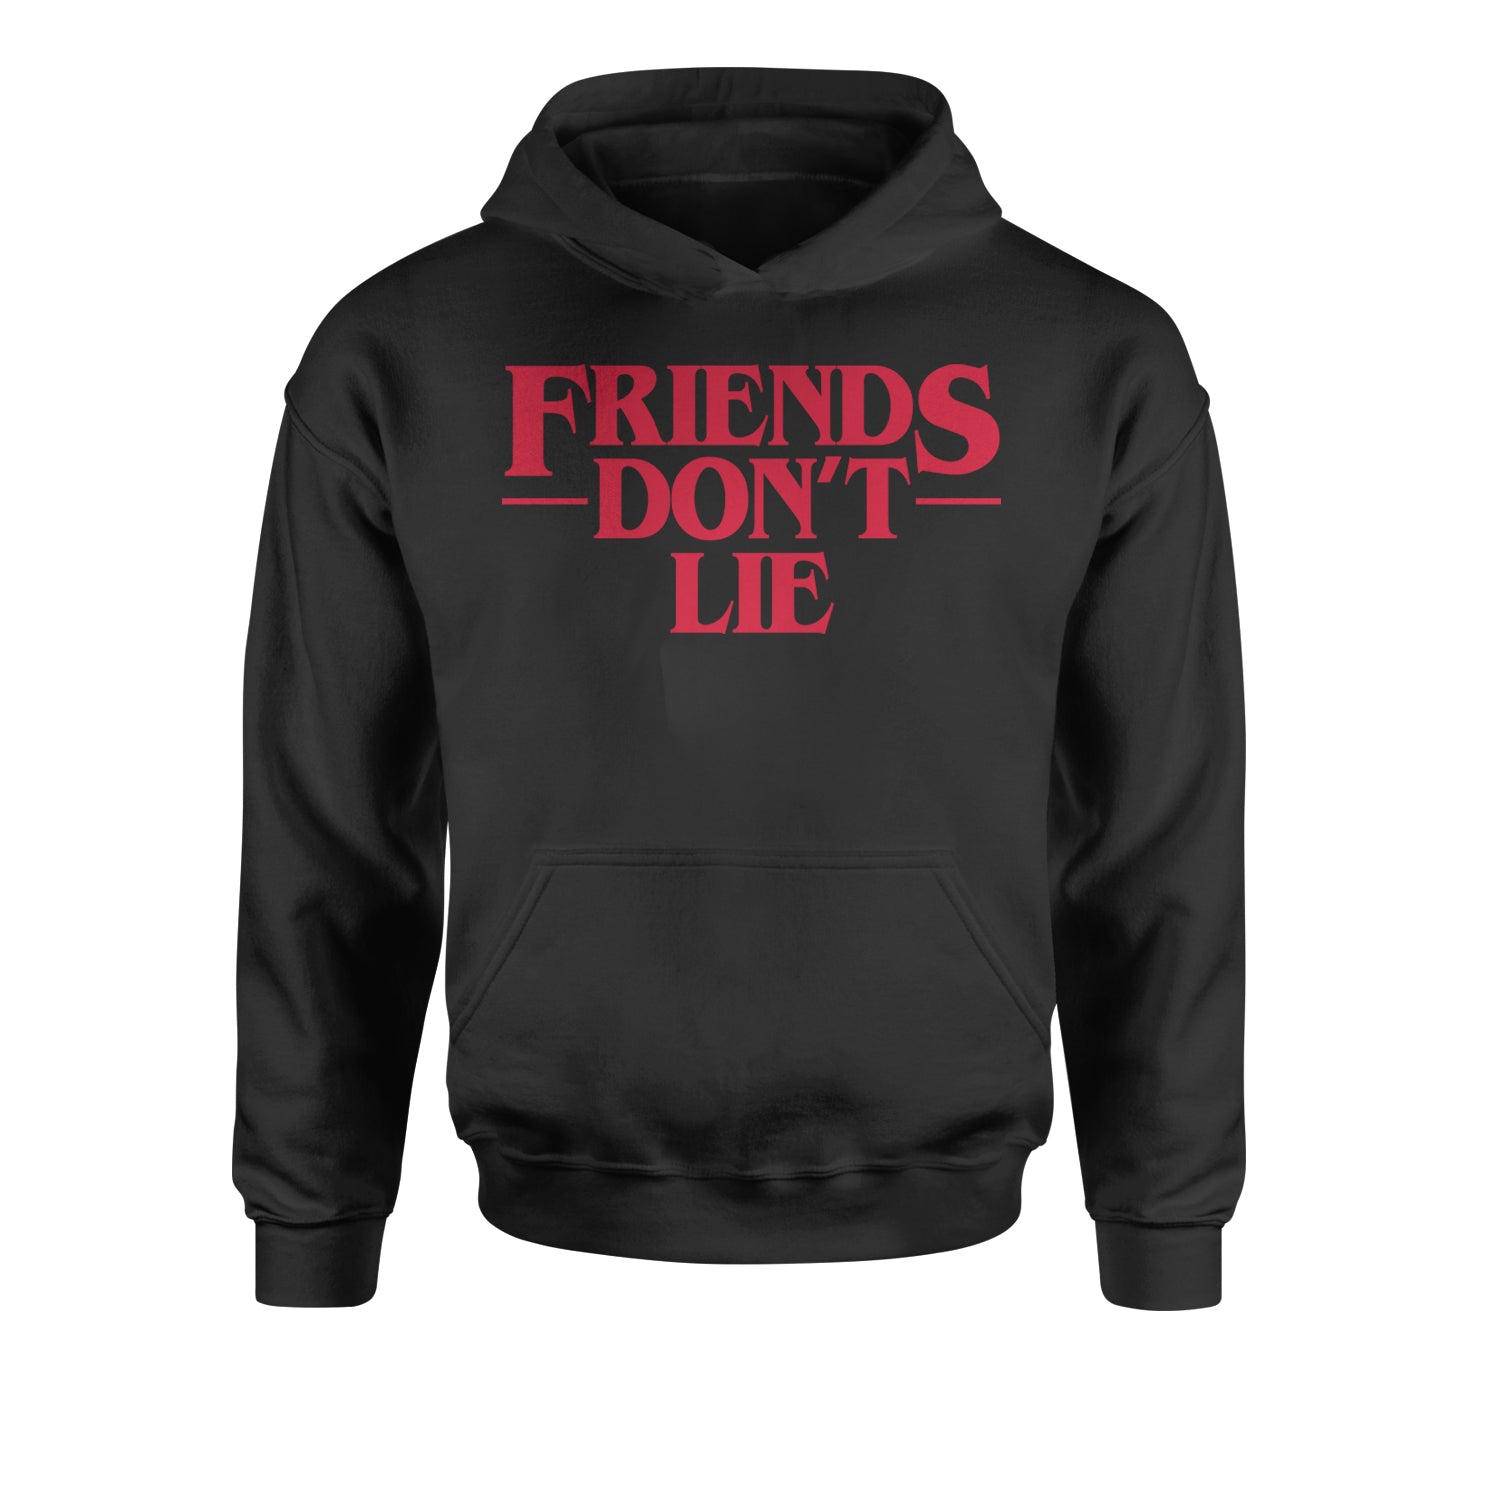 Friends Don’t Lie Youth-Sized Hoodie